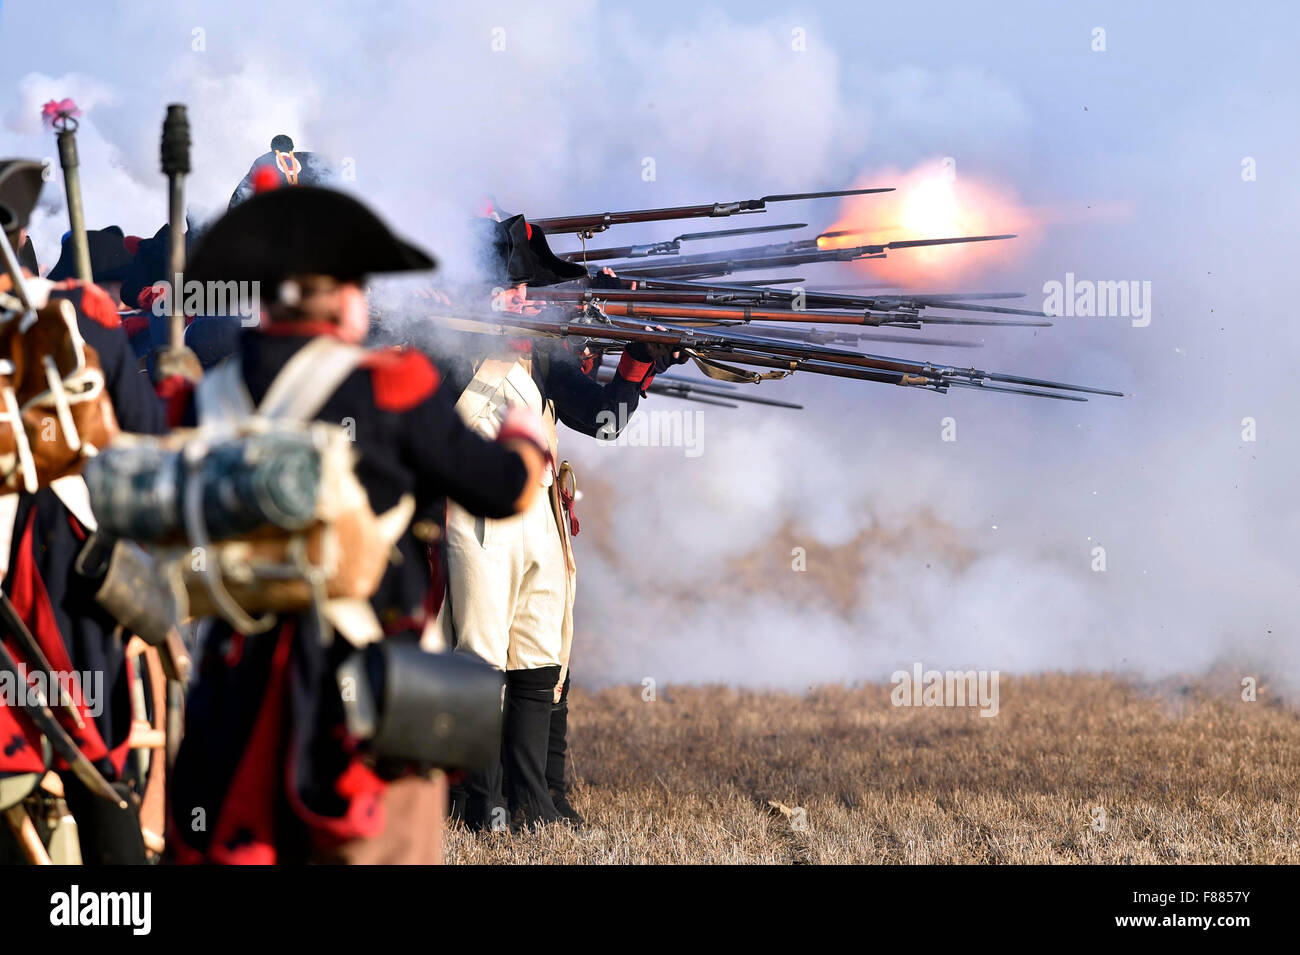 Tvarozna, Czech Republic. 05th Dec, 2015. Over 18,000 visitors watched the re-enactment of the Battle at Slavkov (Austerlitz), where the Napoleonic army scored a famous victory in 1805, which was staged by 2000 history fans in period uniforms today in Tvarozna, Czech republic, December 5, 2015. © Vaclav Salek/CTK Photo/Alamy Live News Stock Photo